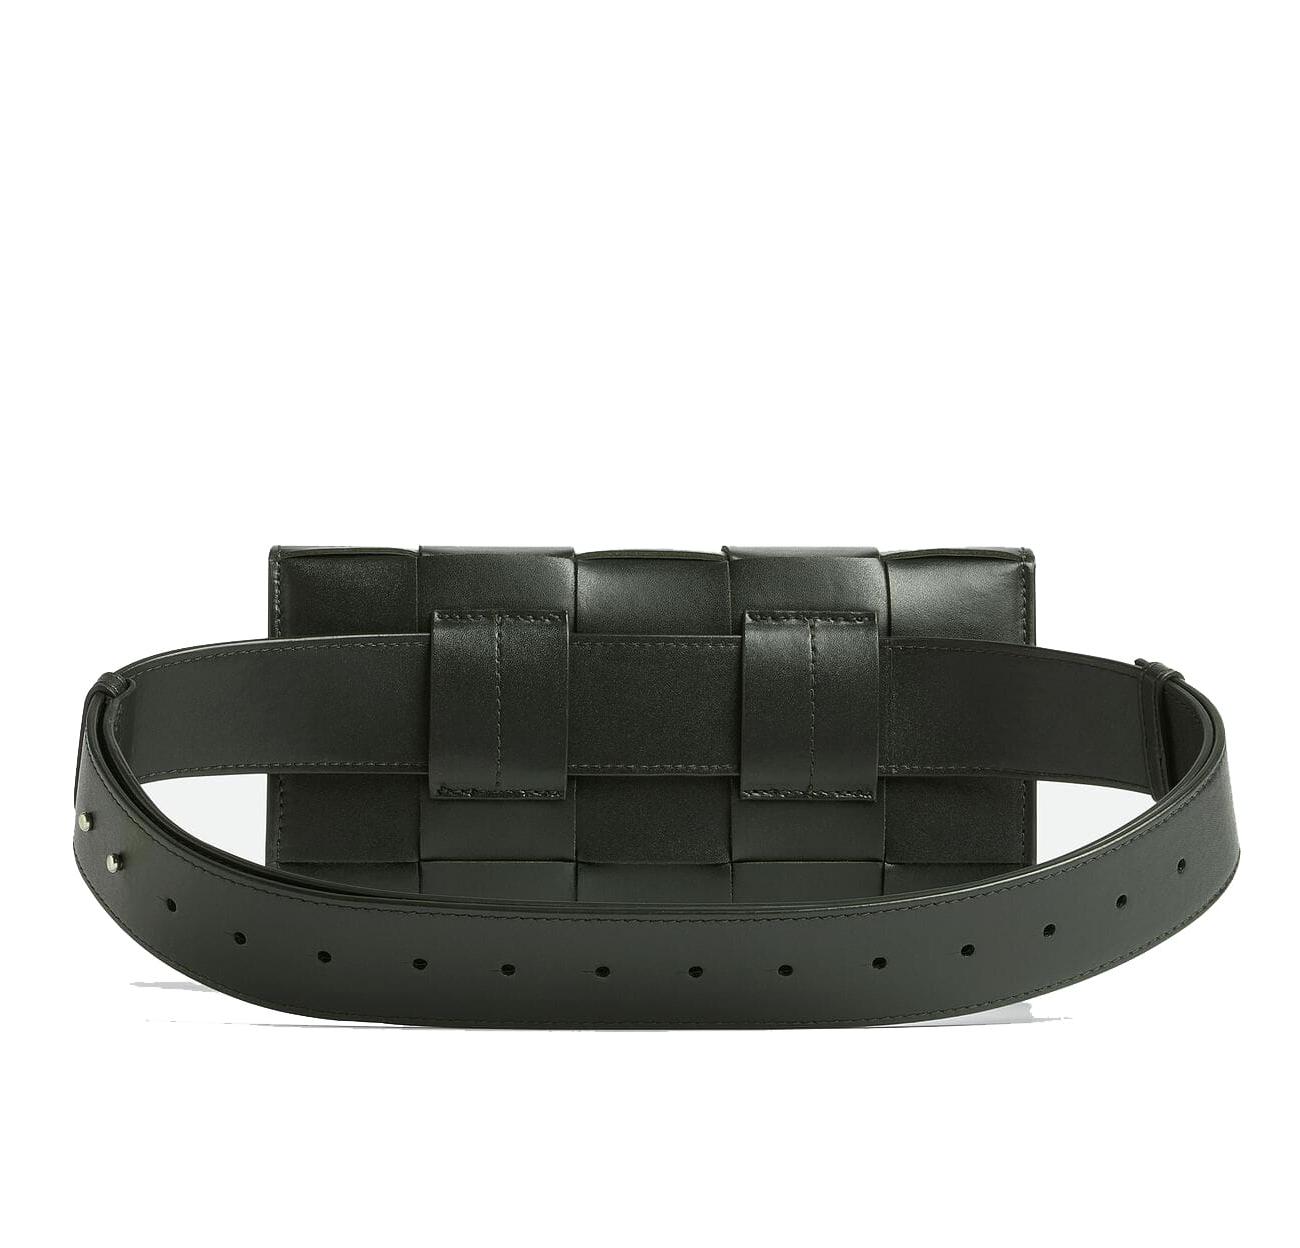 Clutch with leather belt in intrecchio weave Dark green